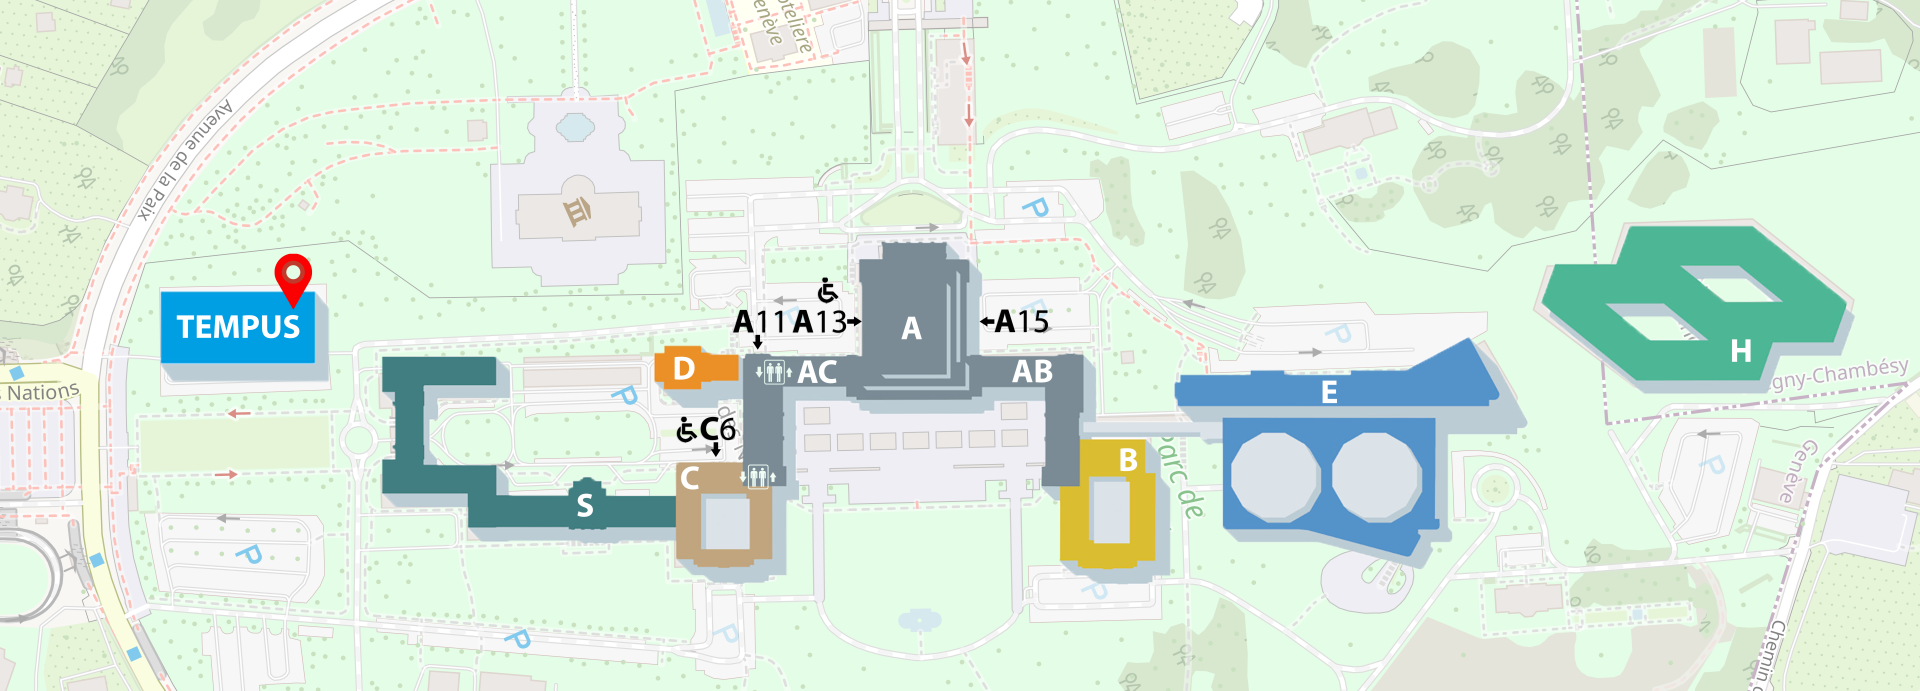 Map of the Palais des Nations, with a pin on the tempus building